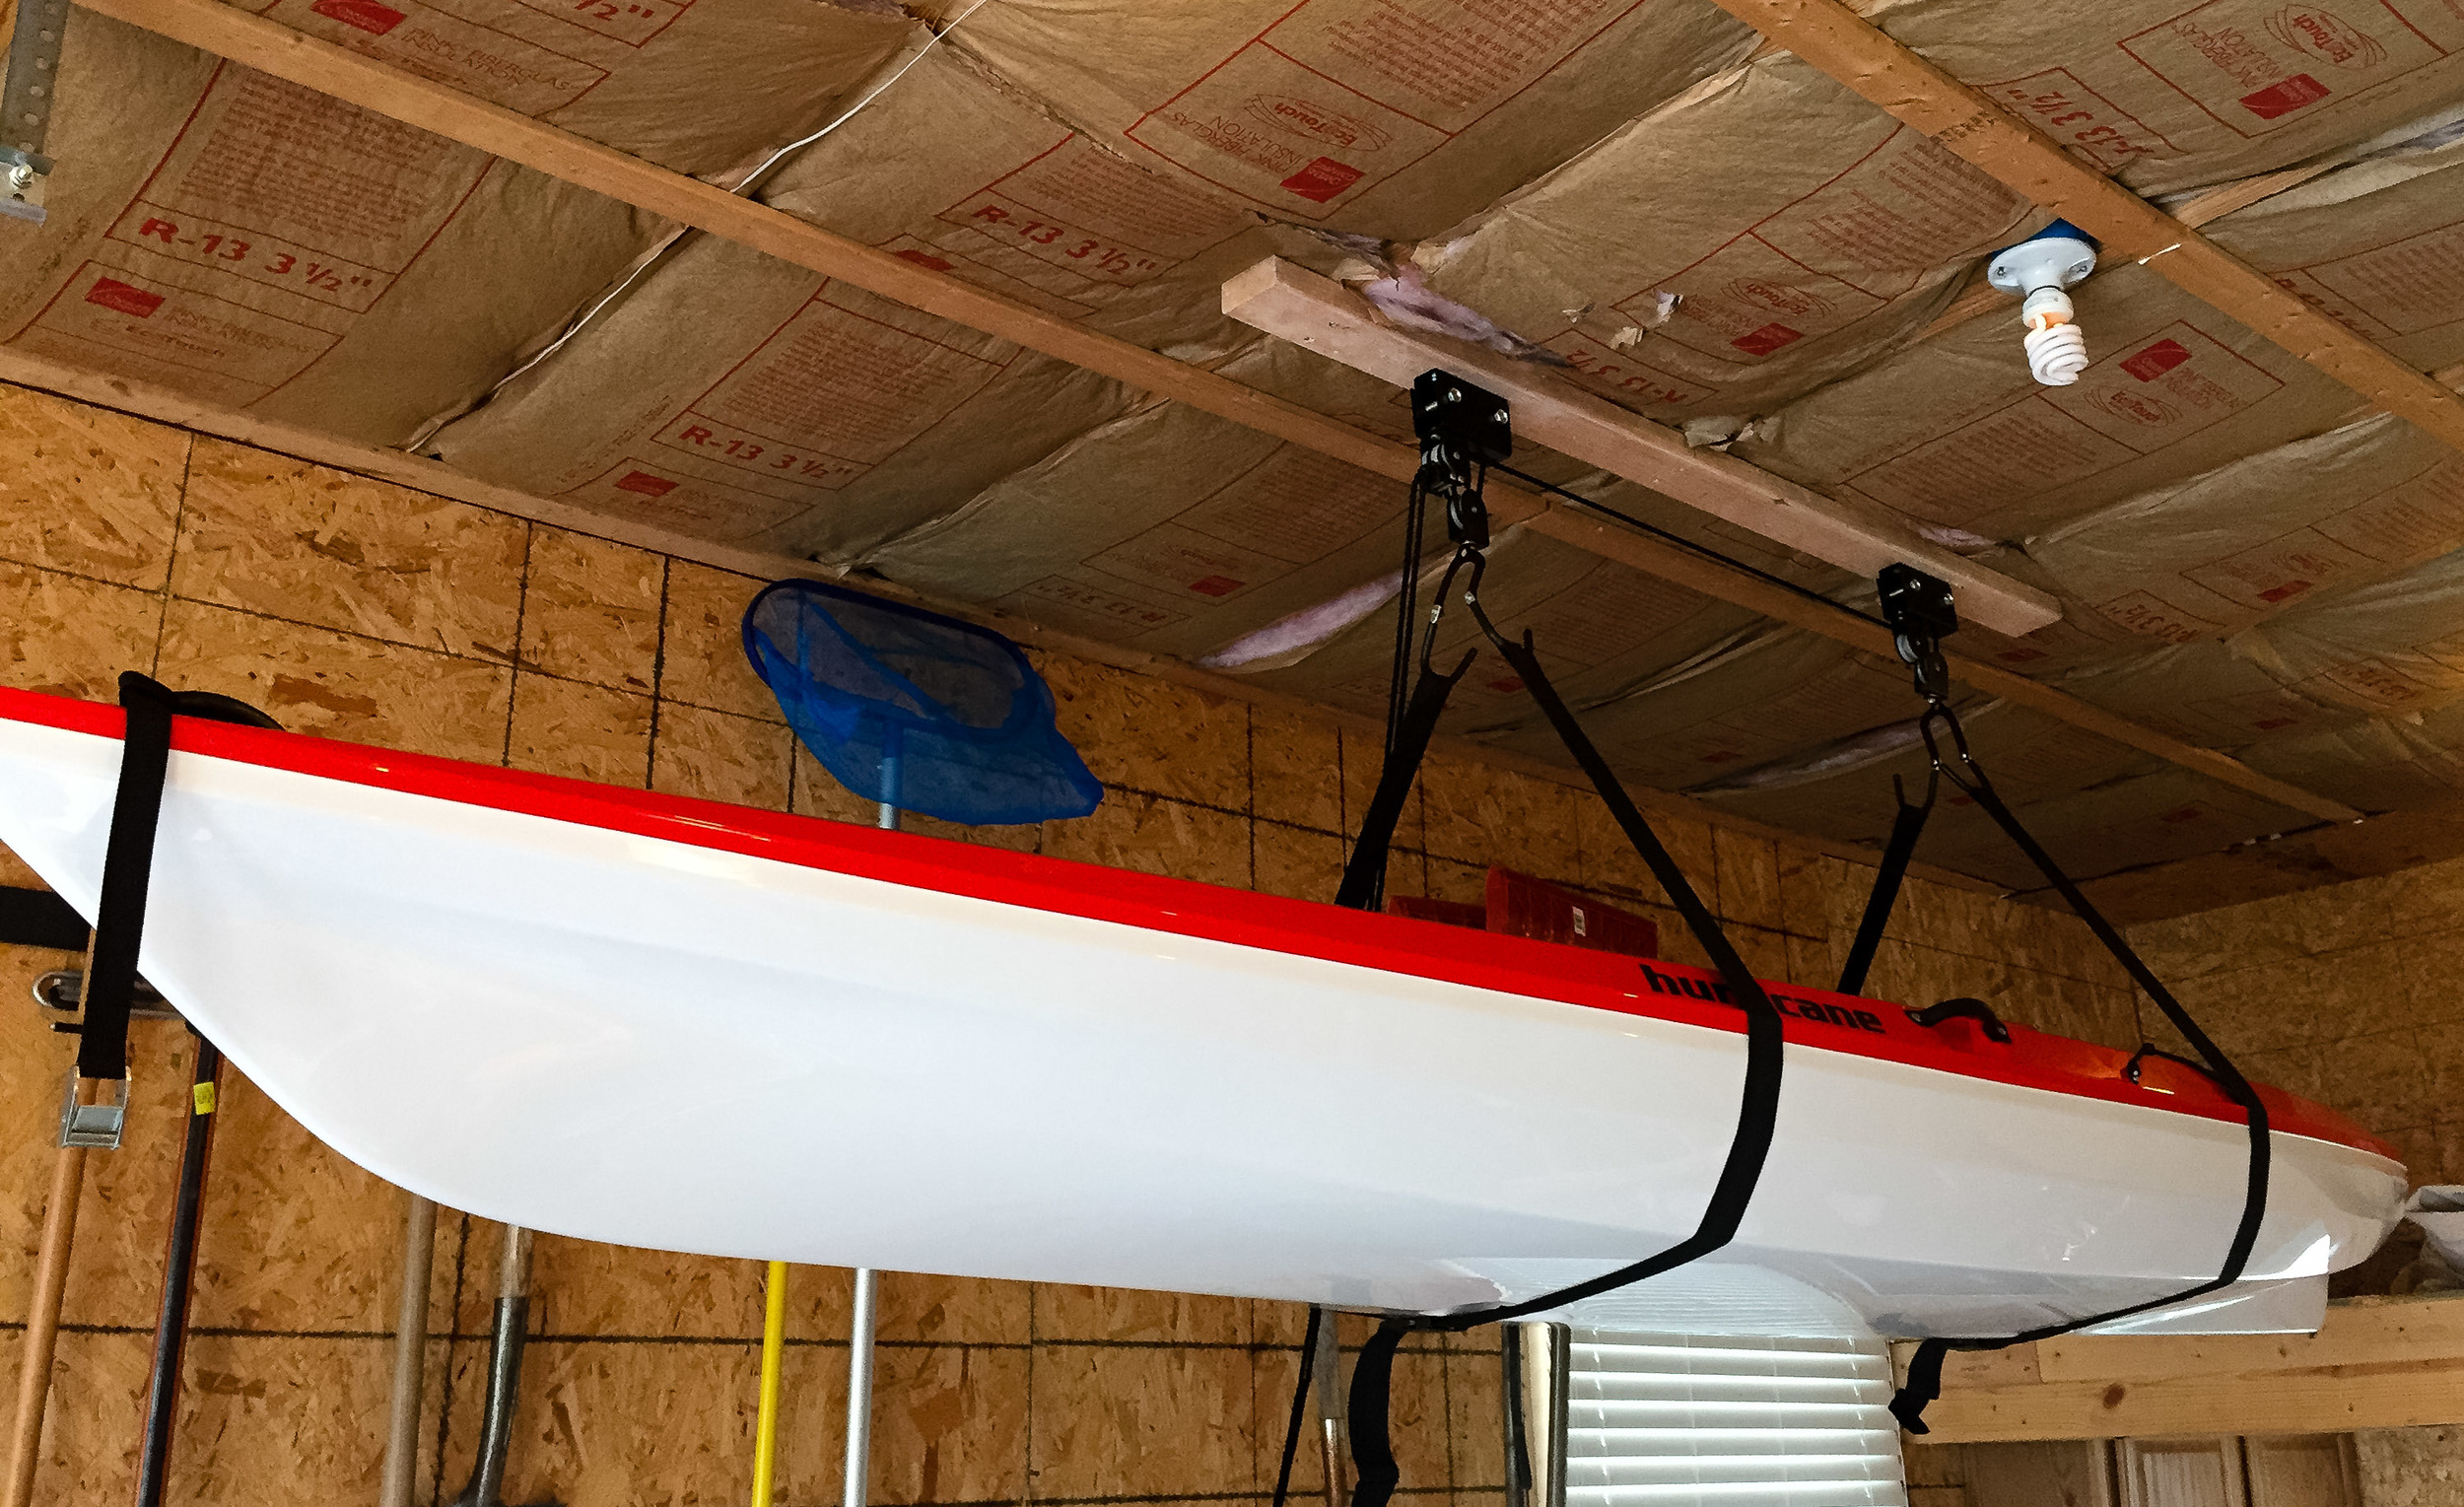 get your kayaks properly stored with a hoist storage system